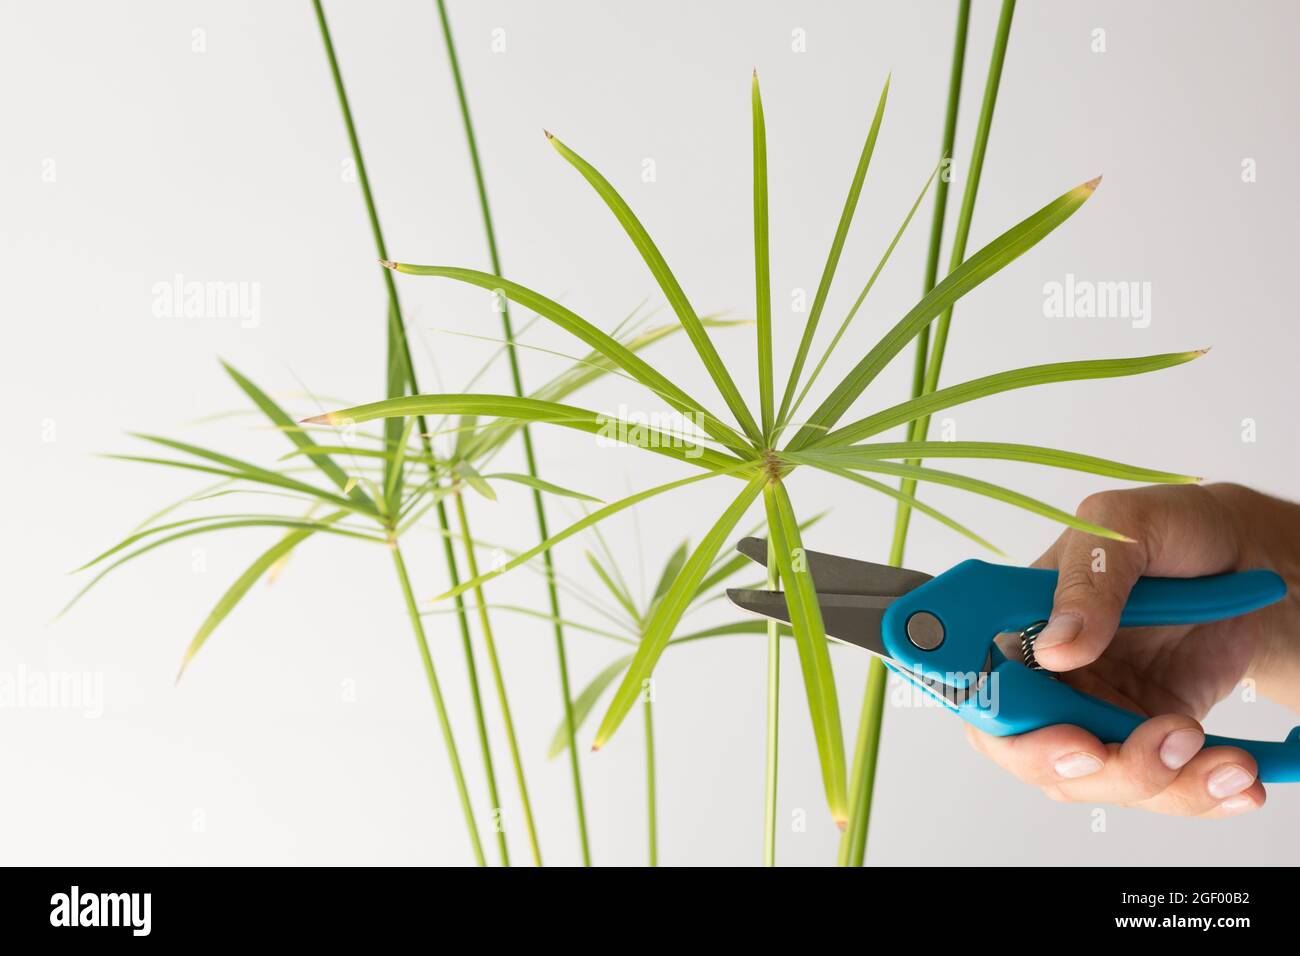 Woman hand cutting umbrella of Cyperus plant for rooting using secateurs on white background Stock Photo